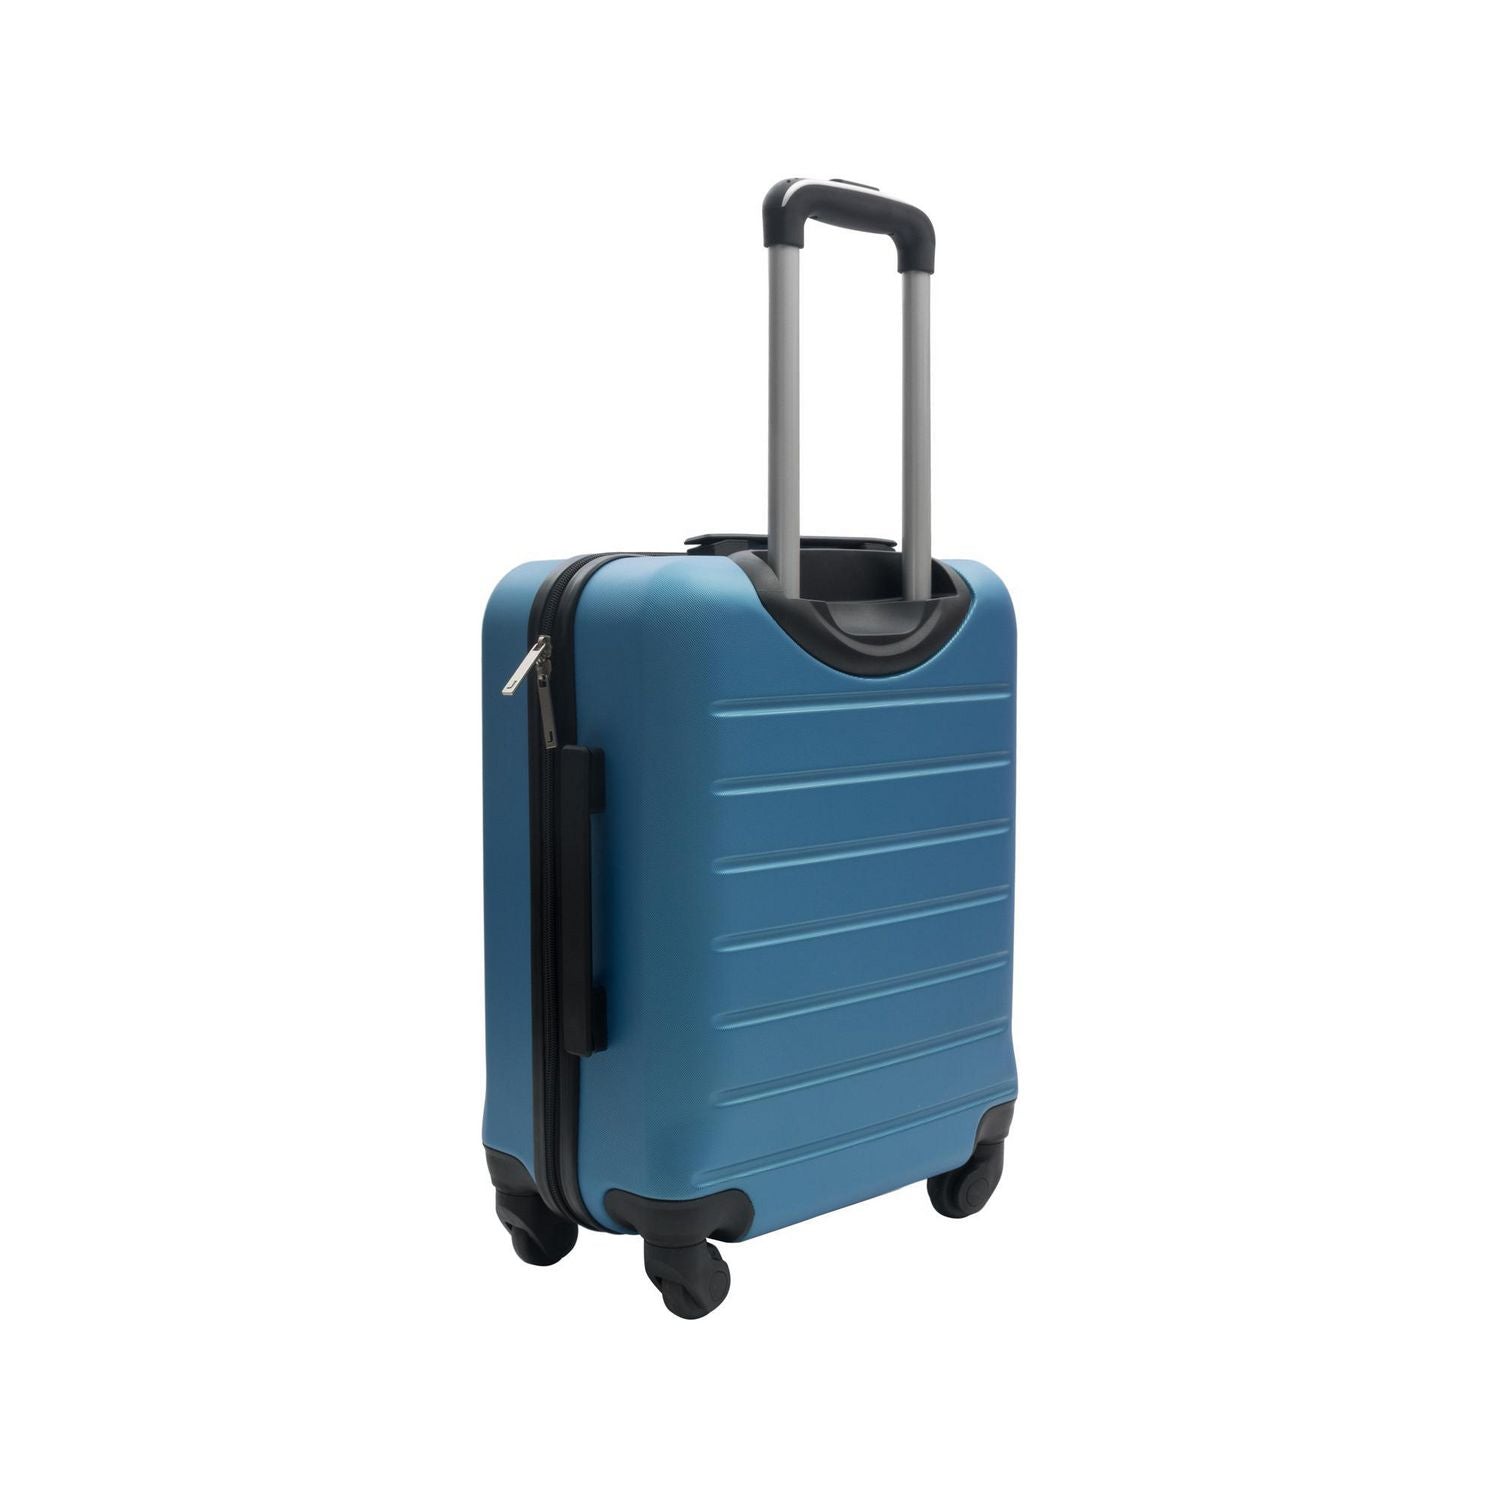 Jetstream Carry-on with 3-Piece Packing Cube Set (Blue)